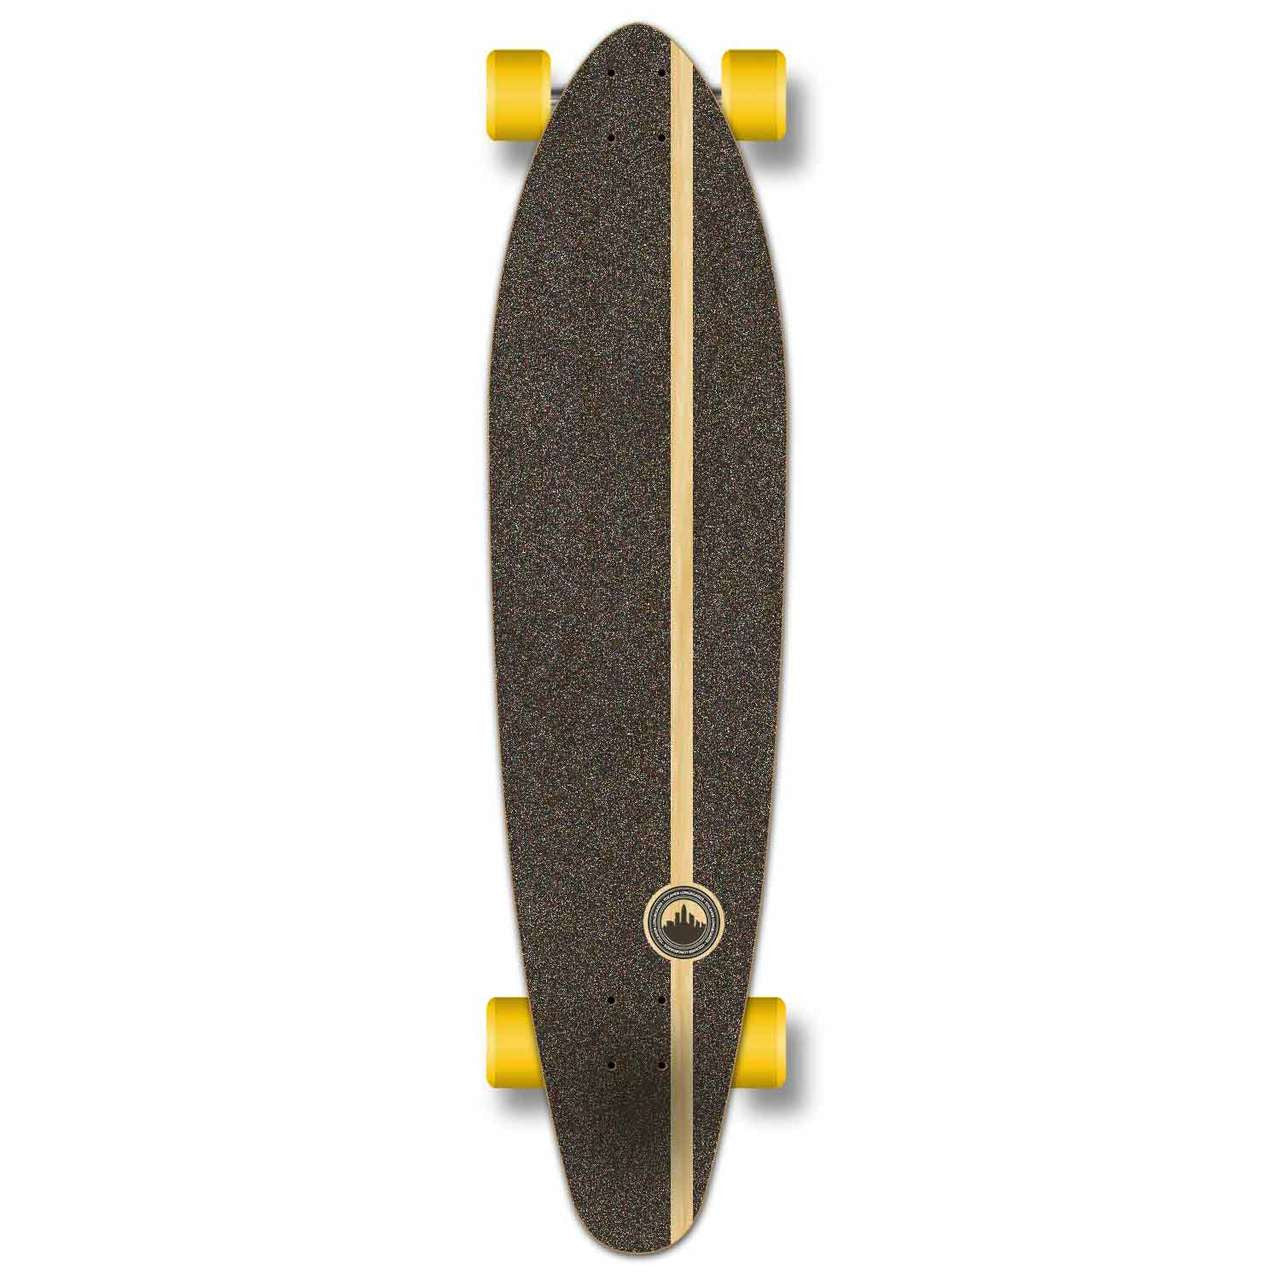 Yocaher Kicktail Longboard Complete - Tropical Day